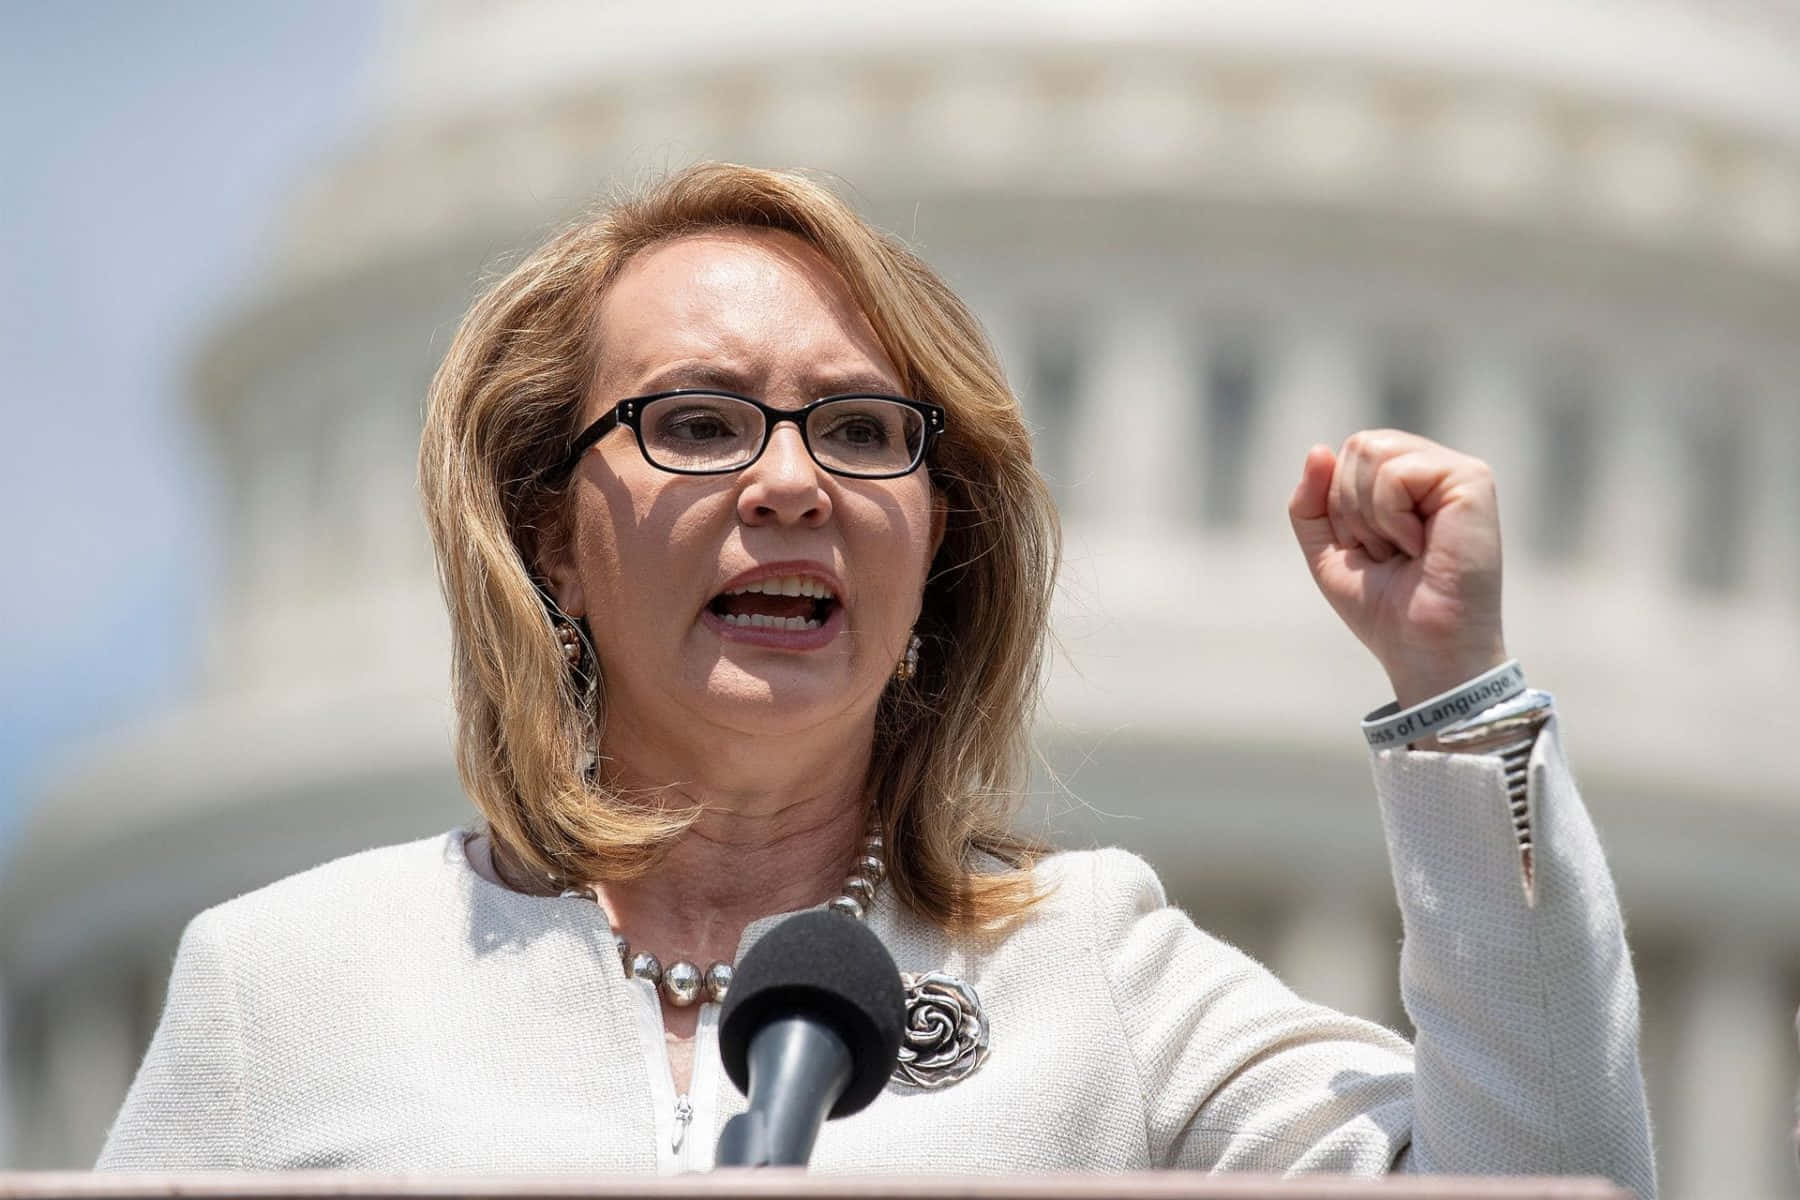 Gabrielle Giffords Speaking Passionately At A Public Event Wallpaper